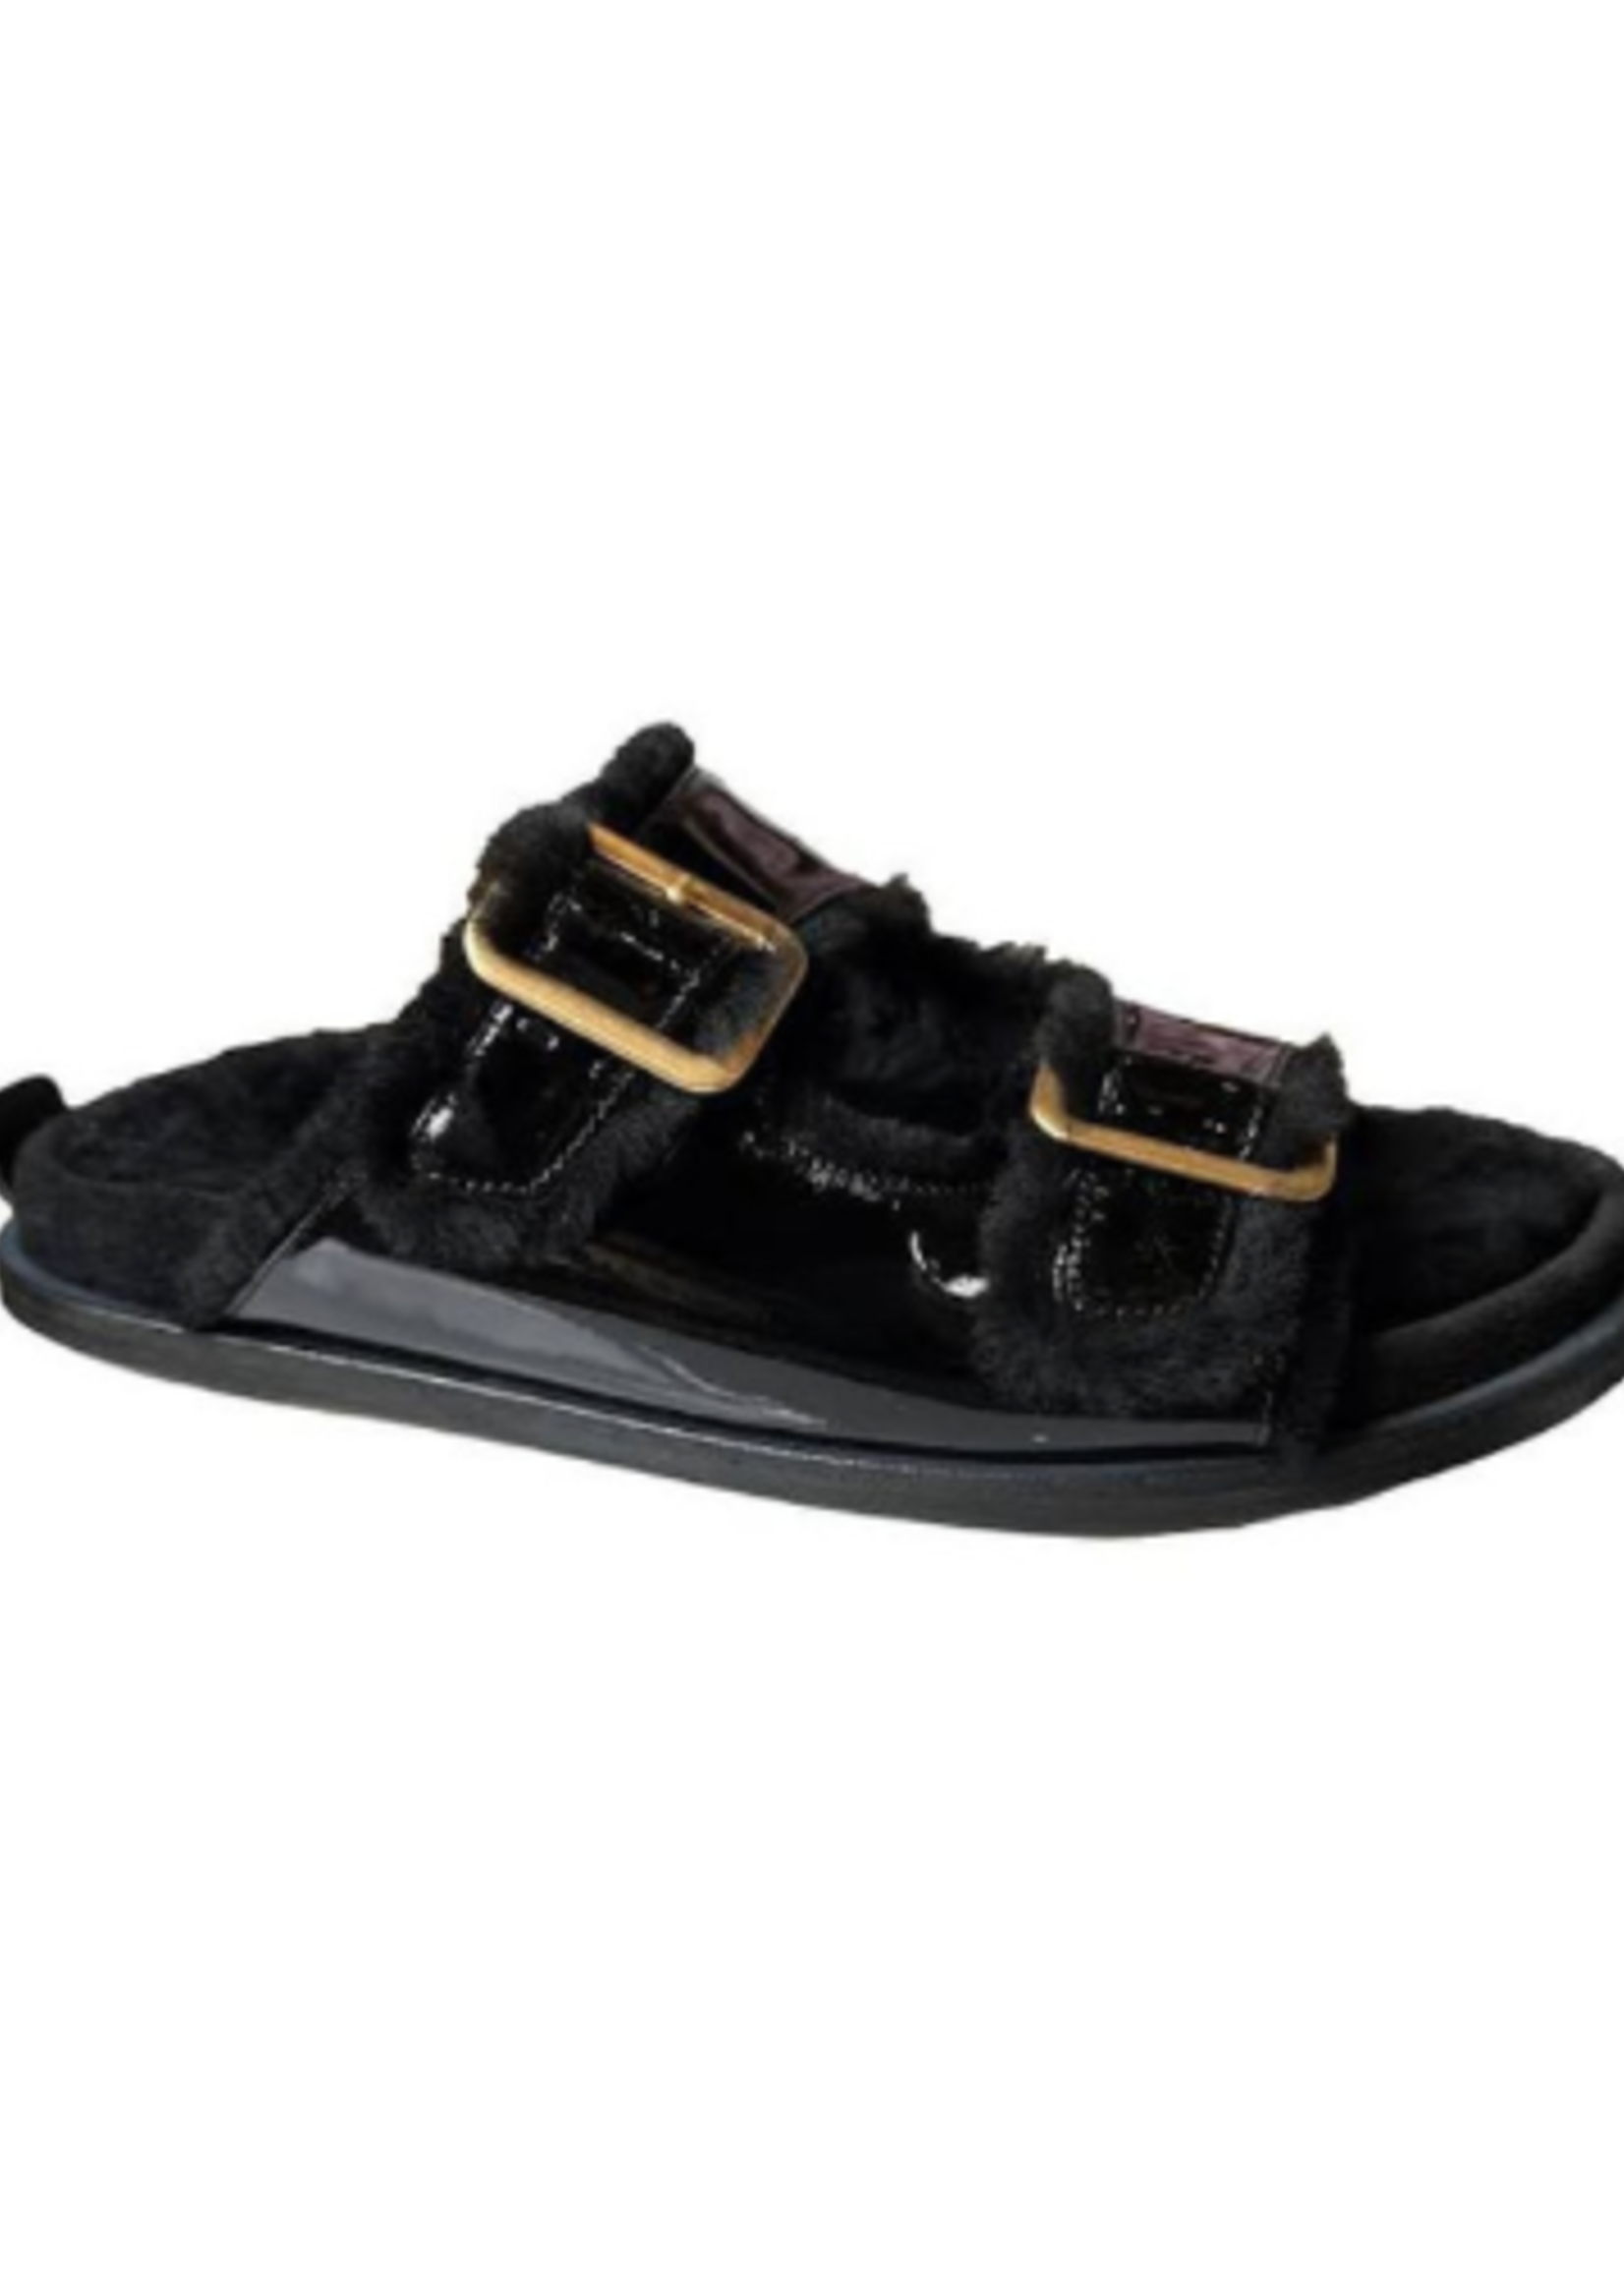 FORTE FORTE SHIERLING AND PATENT LEATHER SANDALS